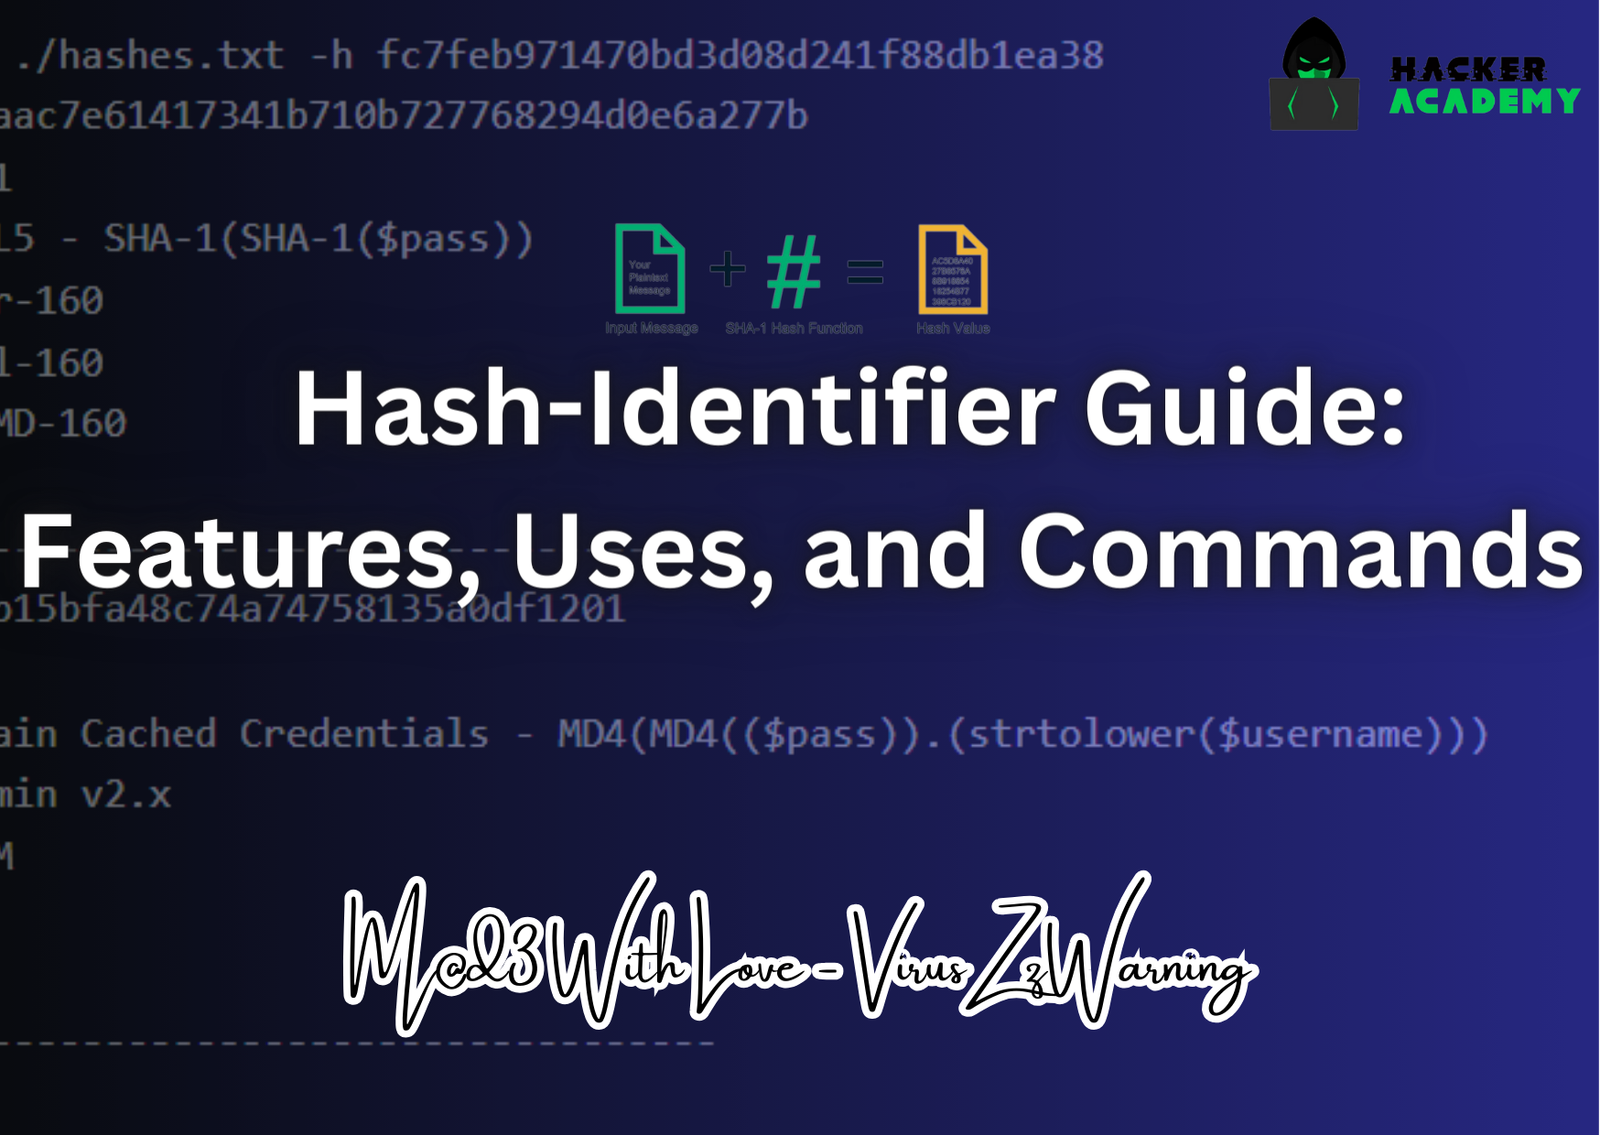 Hash-Identifier Guide: Features, Uses, and Commands